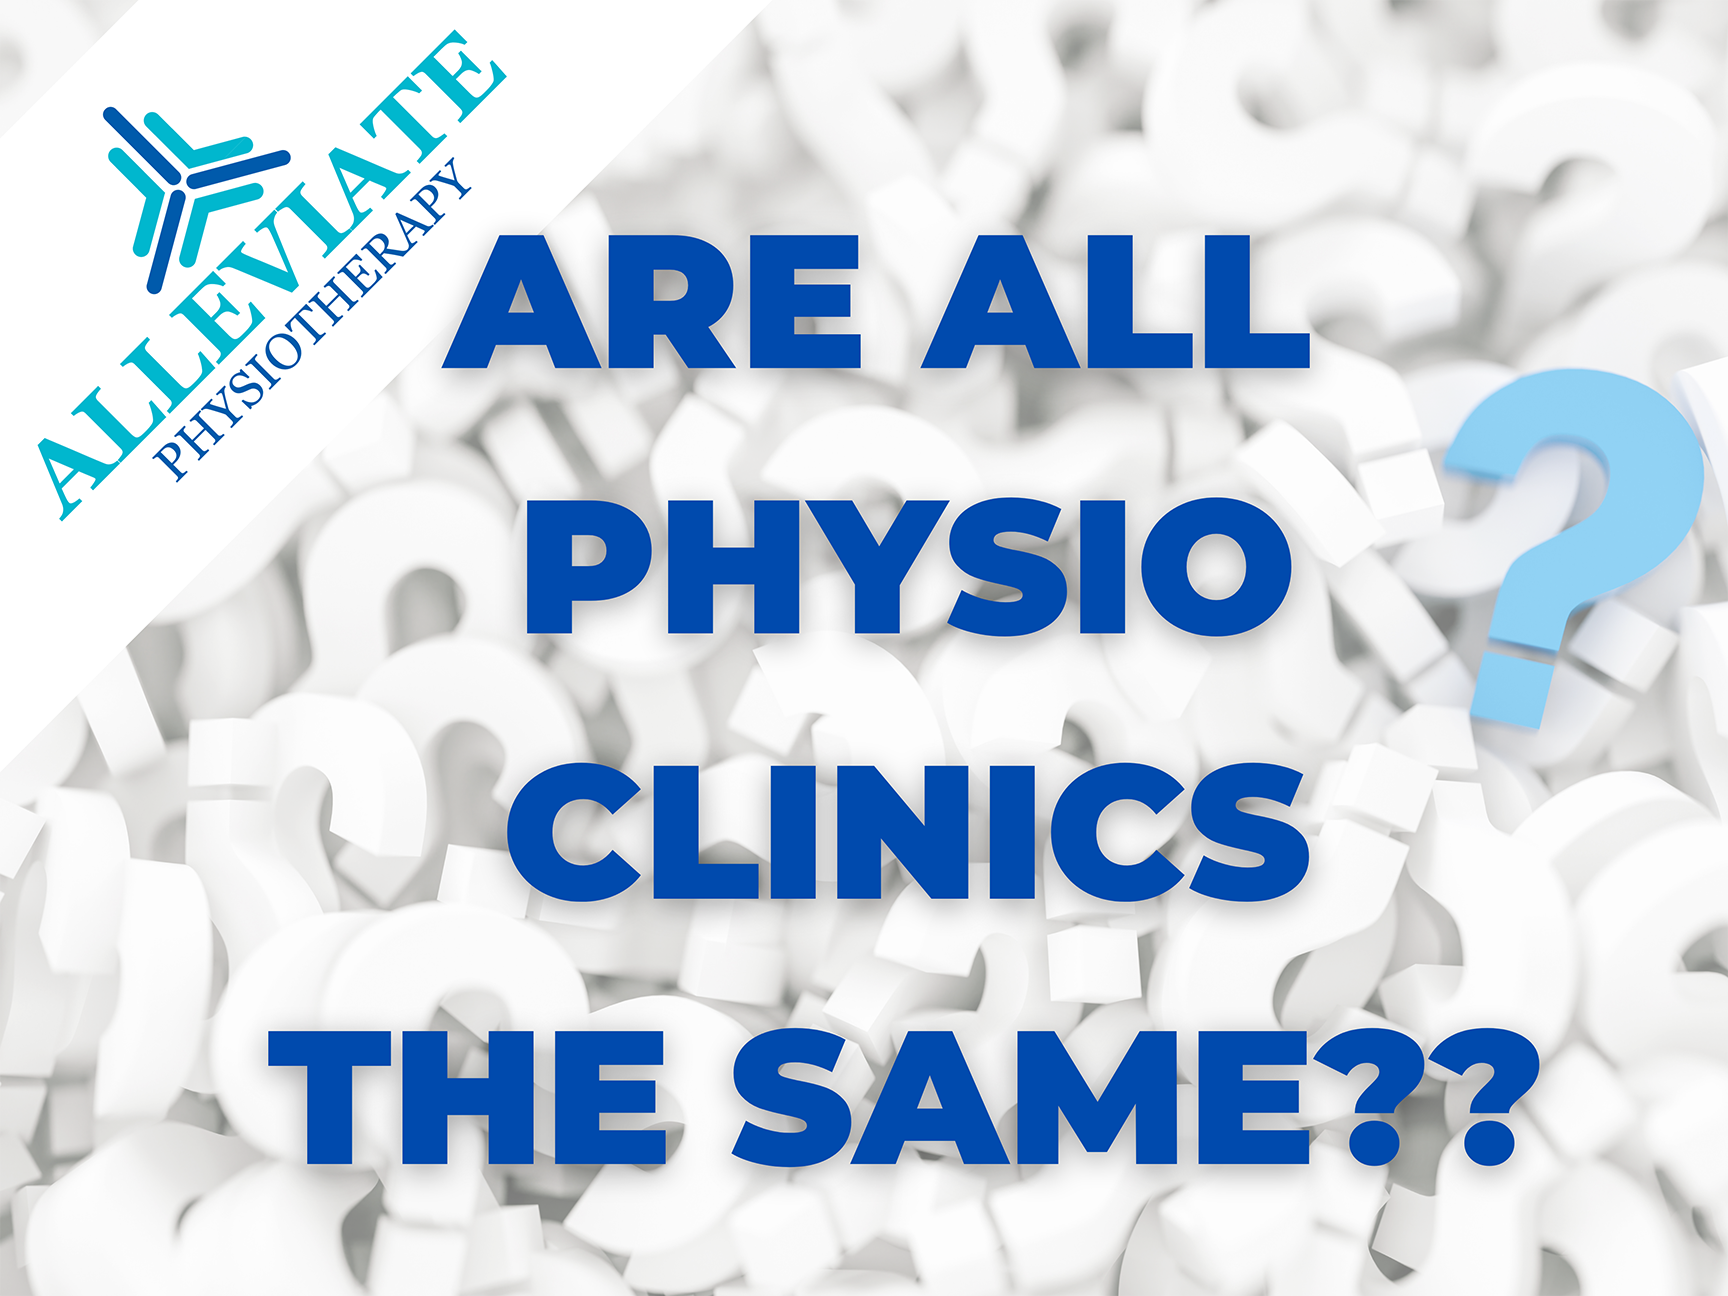 Are all physio clinics the same?